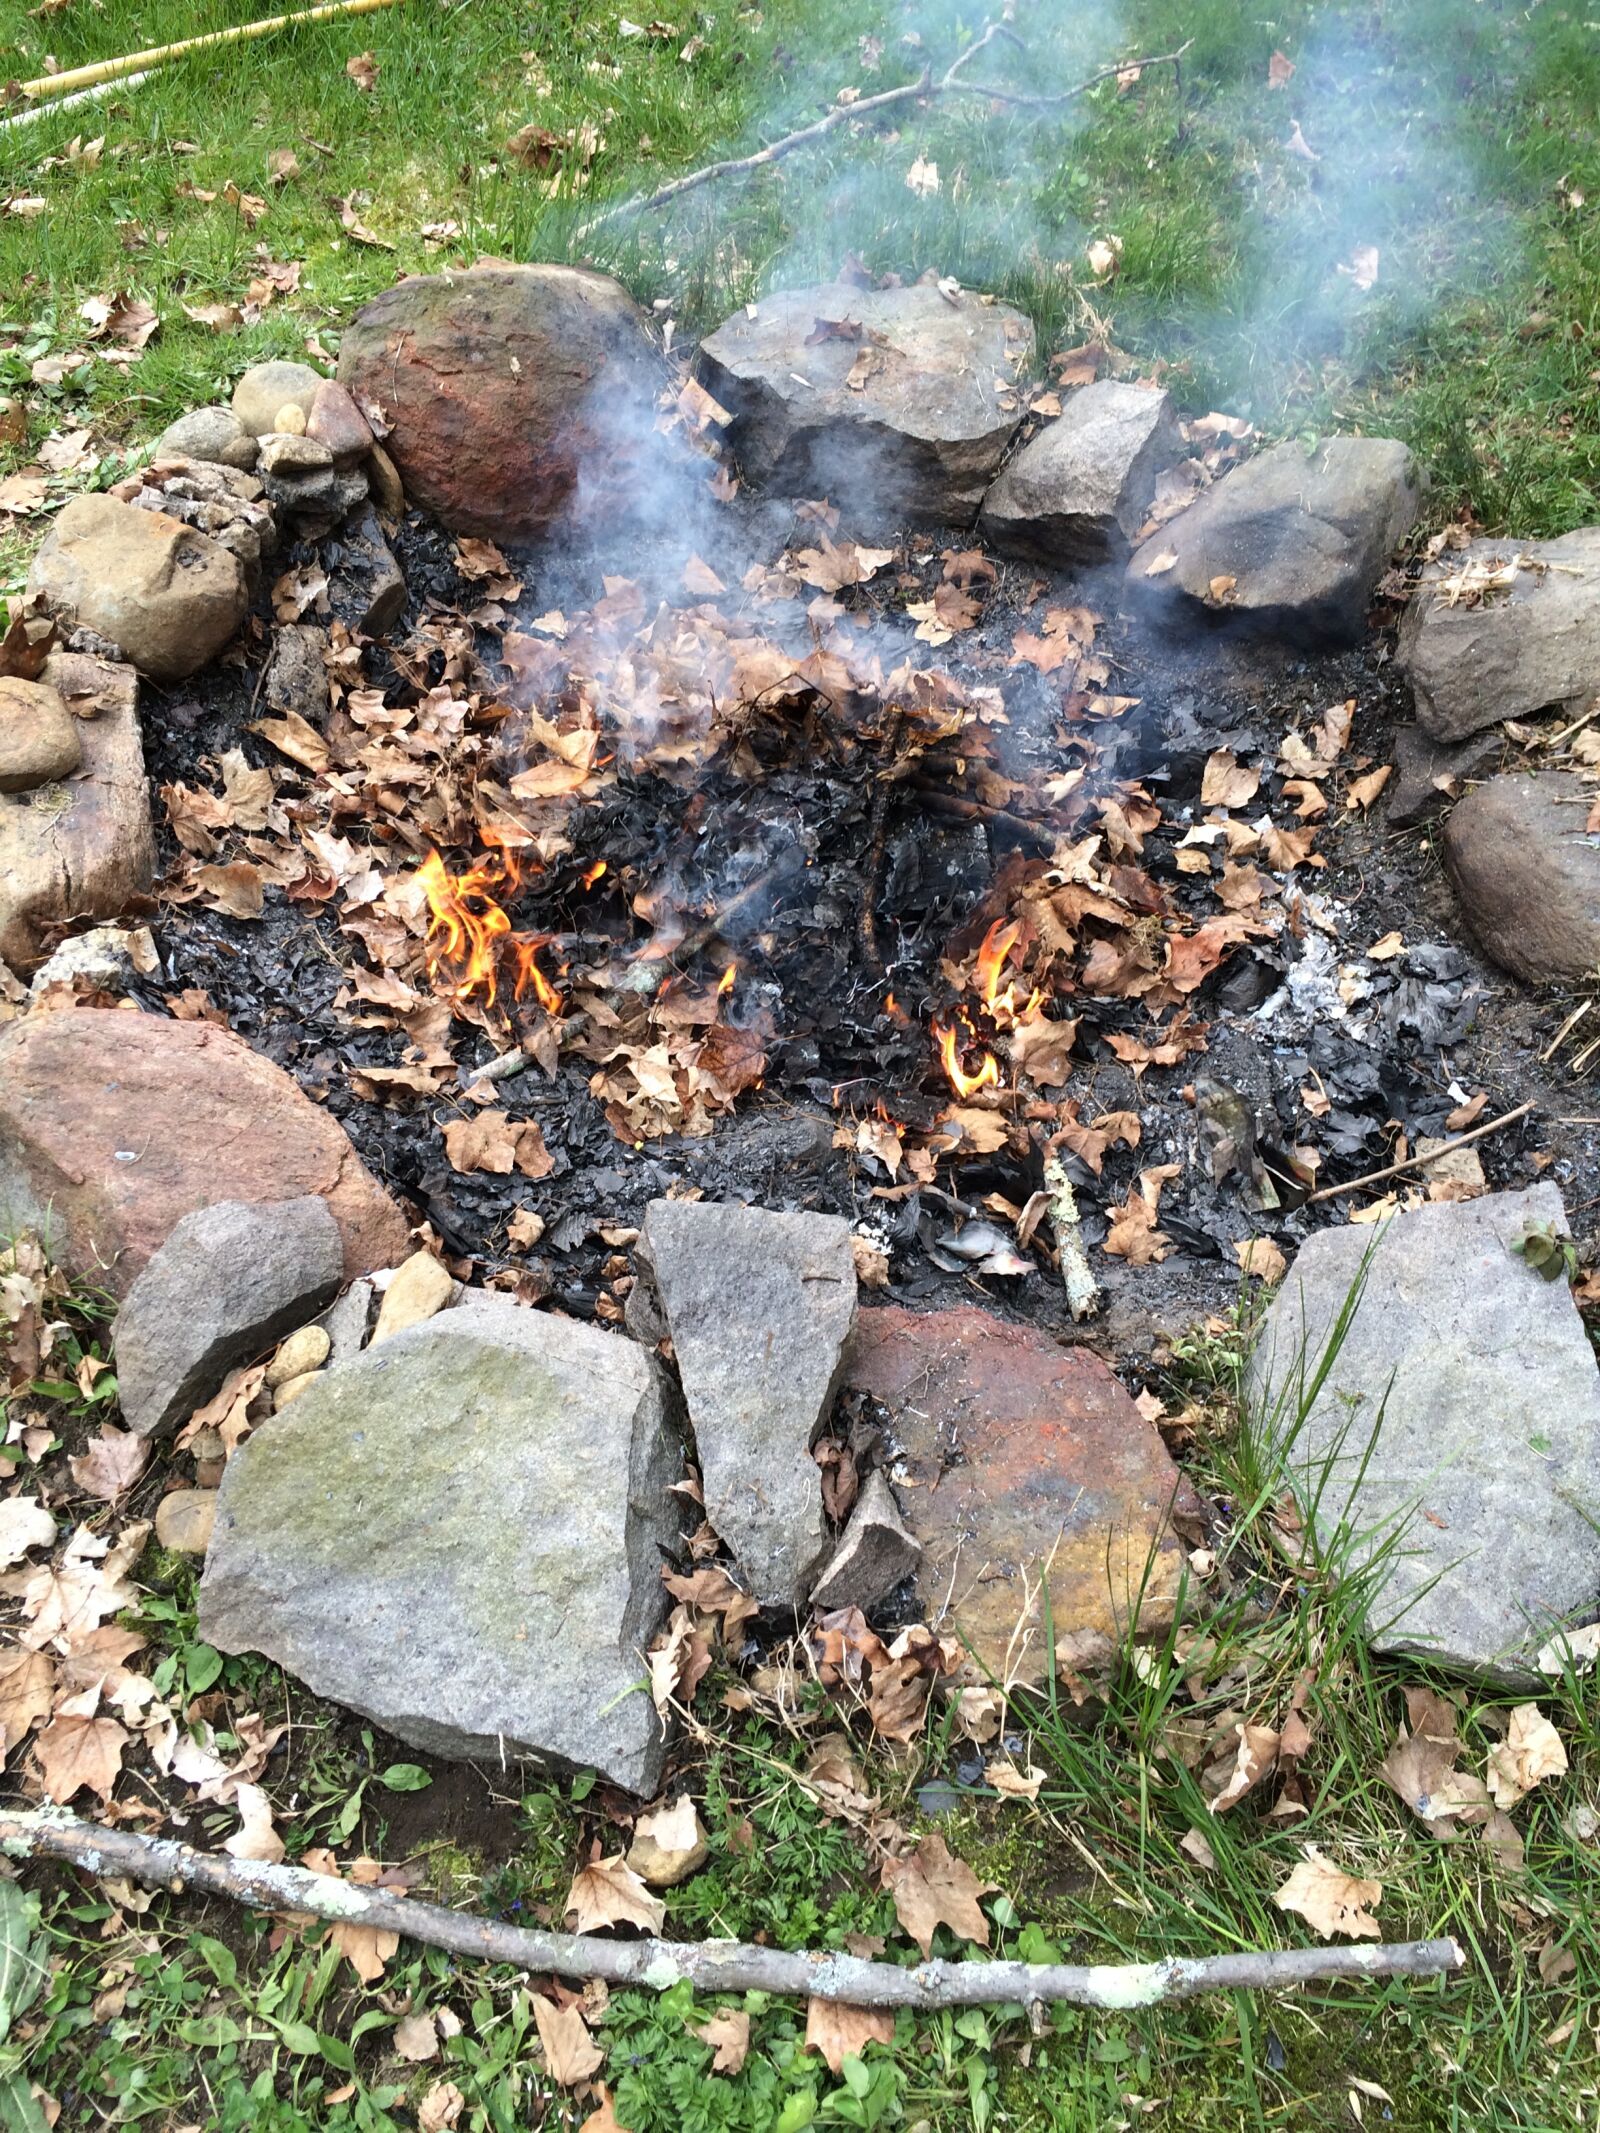 Apple iPhone 5s + iPhone 5s back camera 4.15mm f/2.2 sample photo. Firepit, outdoor fire, campfire photography